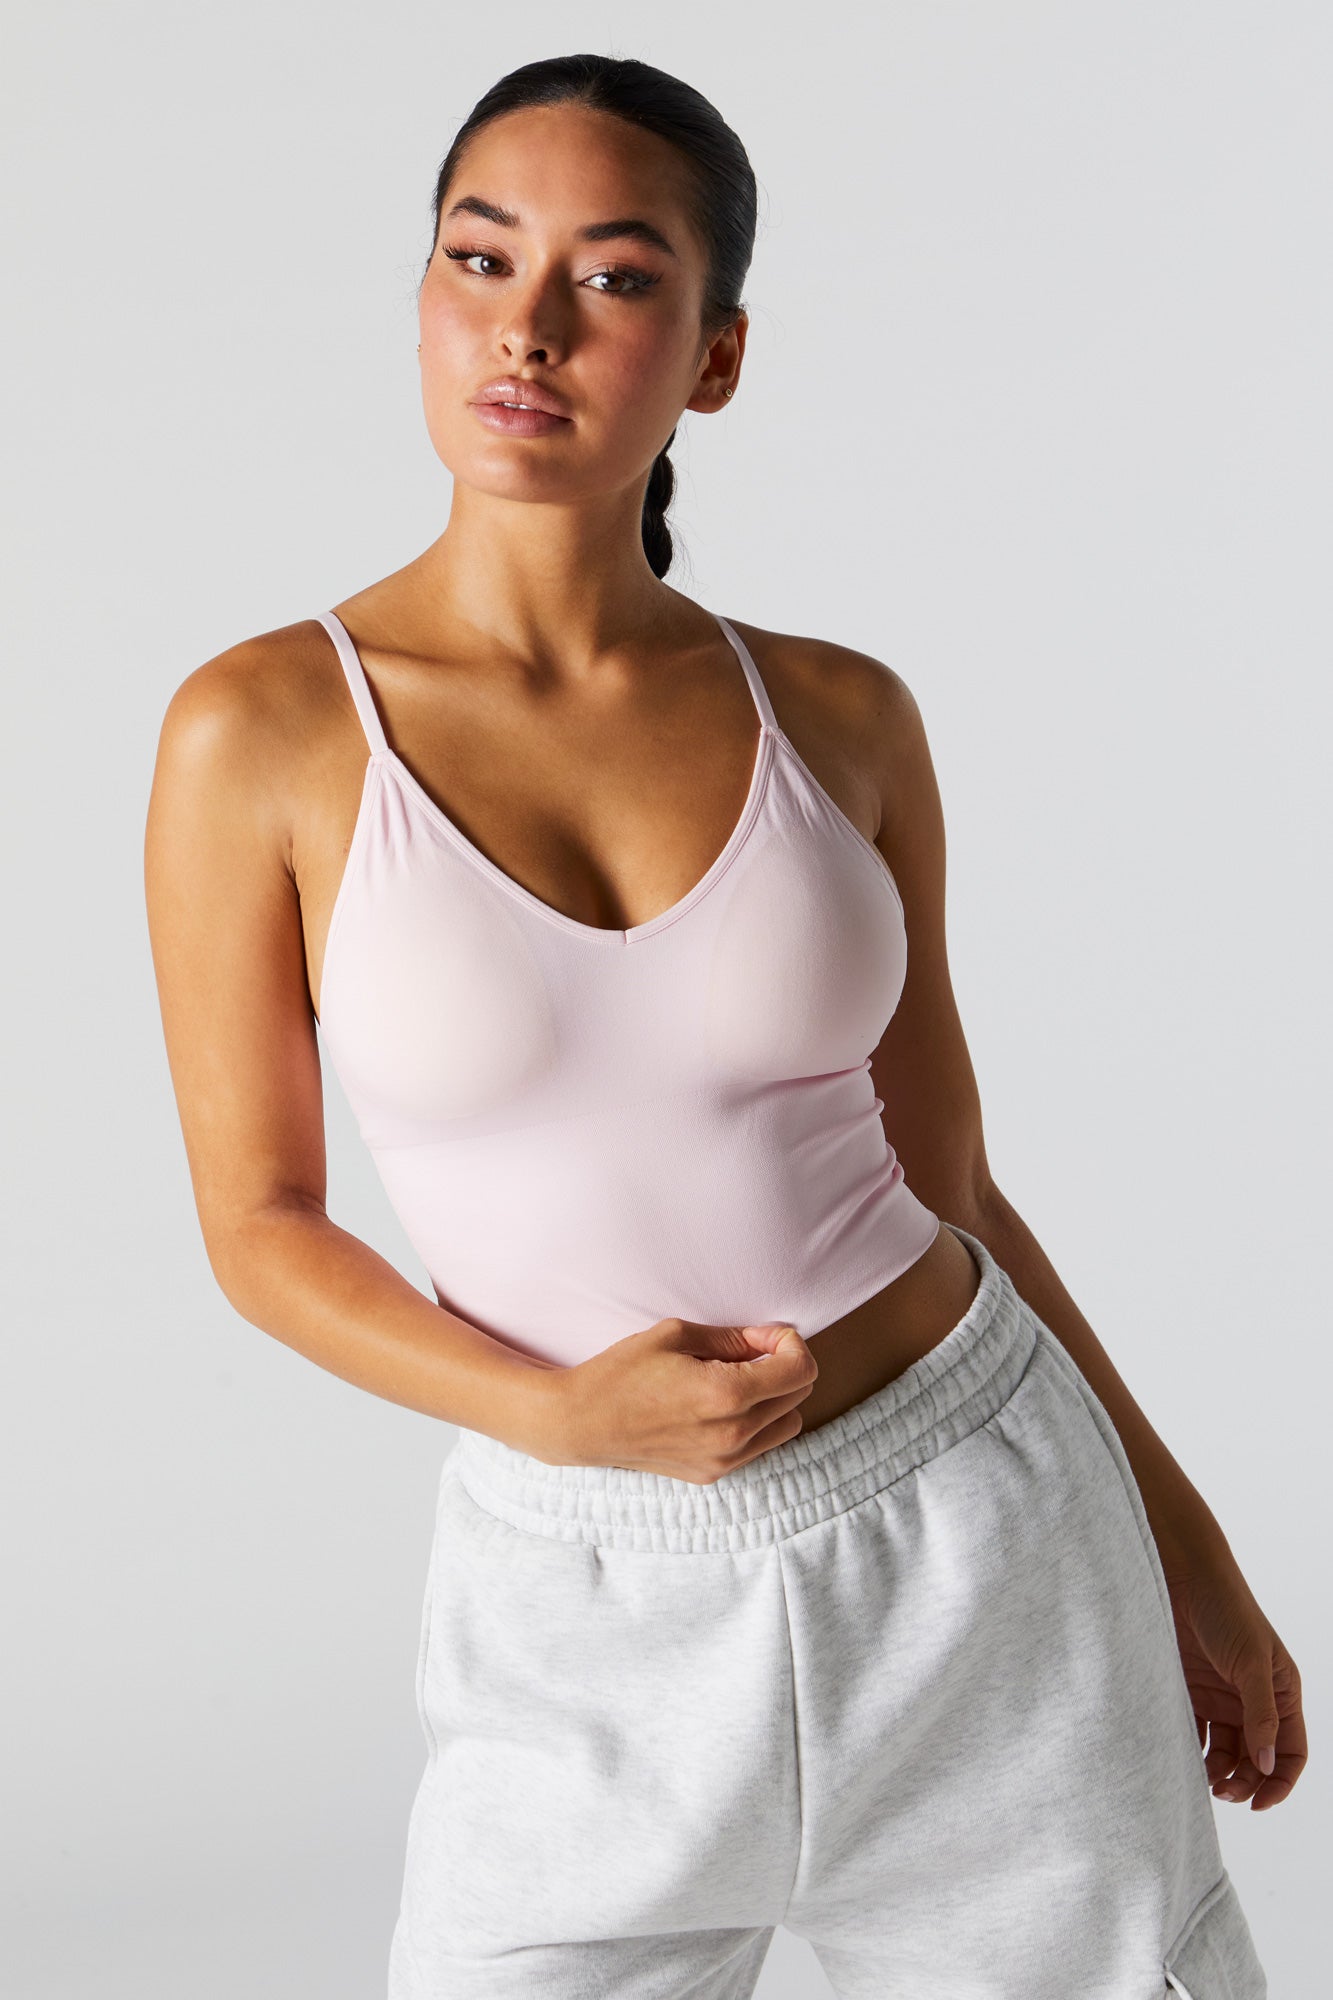 This tank top has subtle built-in padding so you can ditch your bra